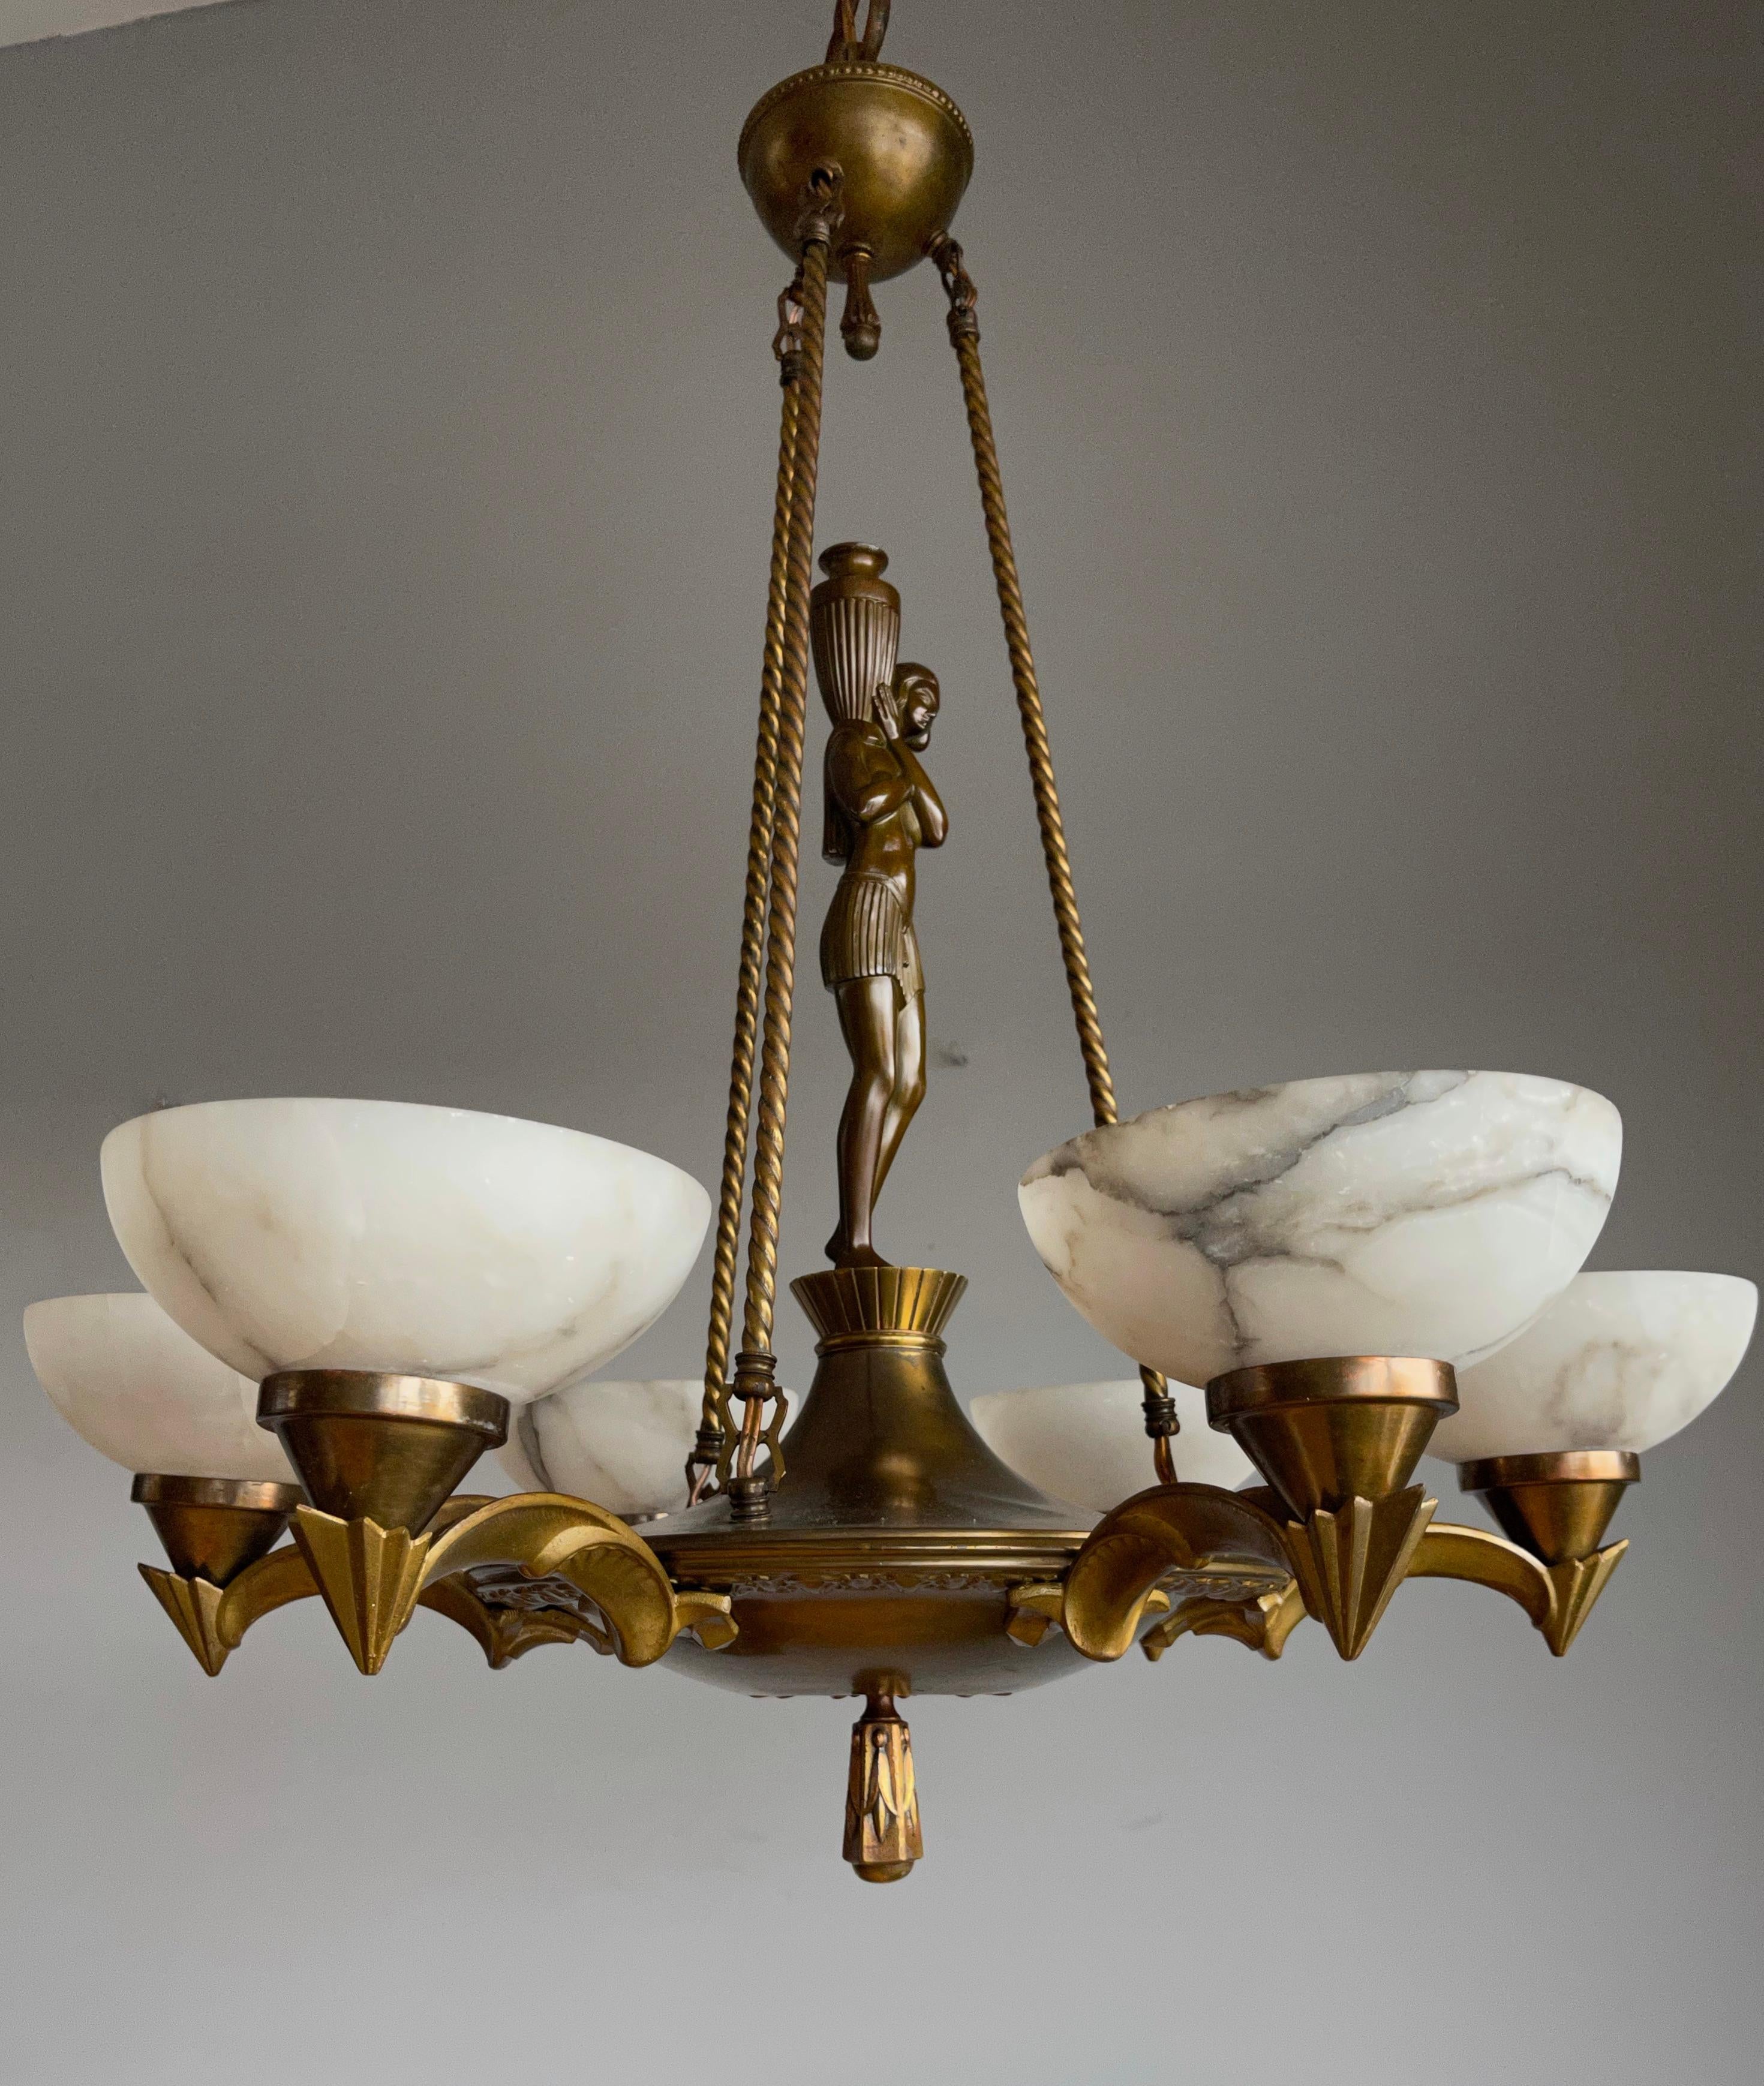 Pure and Stylish Art Deco Sculpture Chandelier w Stunning Alabaster Shades 1920s For Sale 8